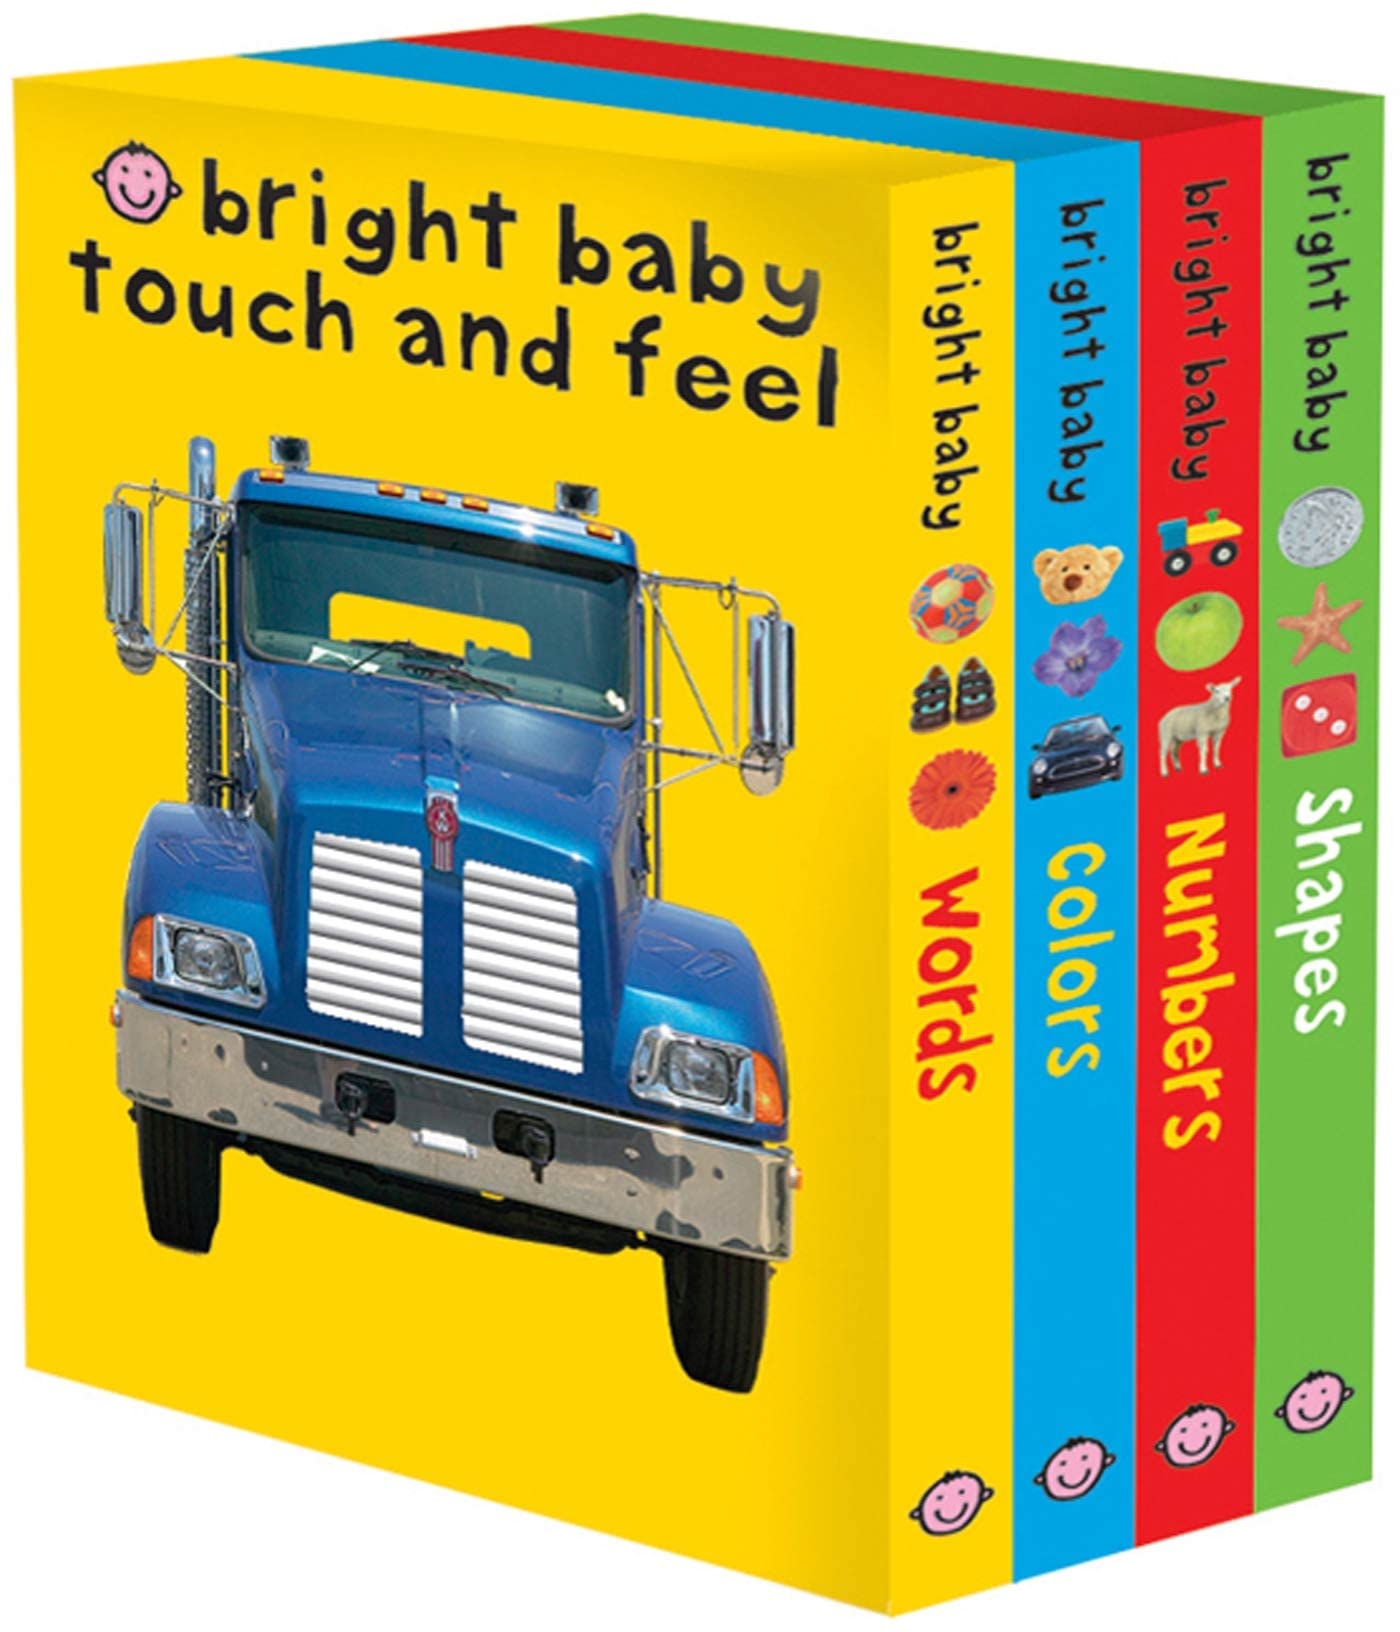 Bright Baby Touch & Feel Slipcase 2 (Bright Baby Touch and Feel)